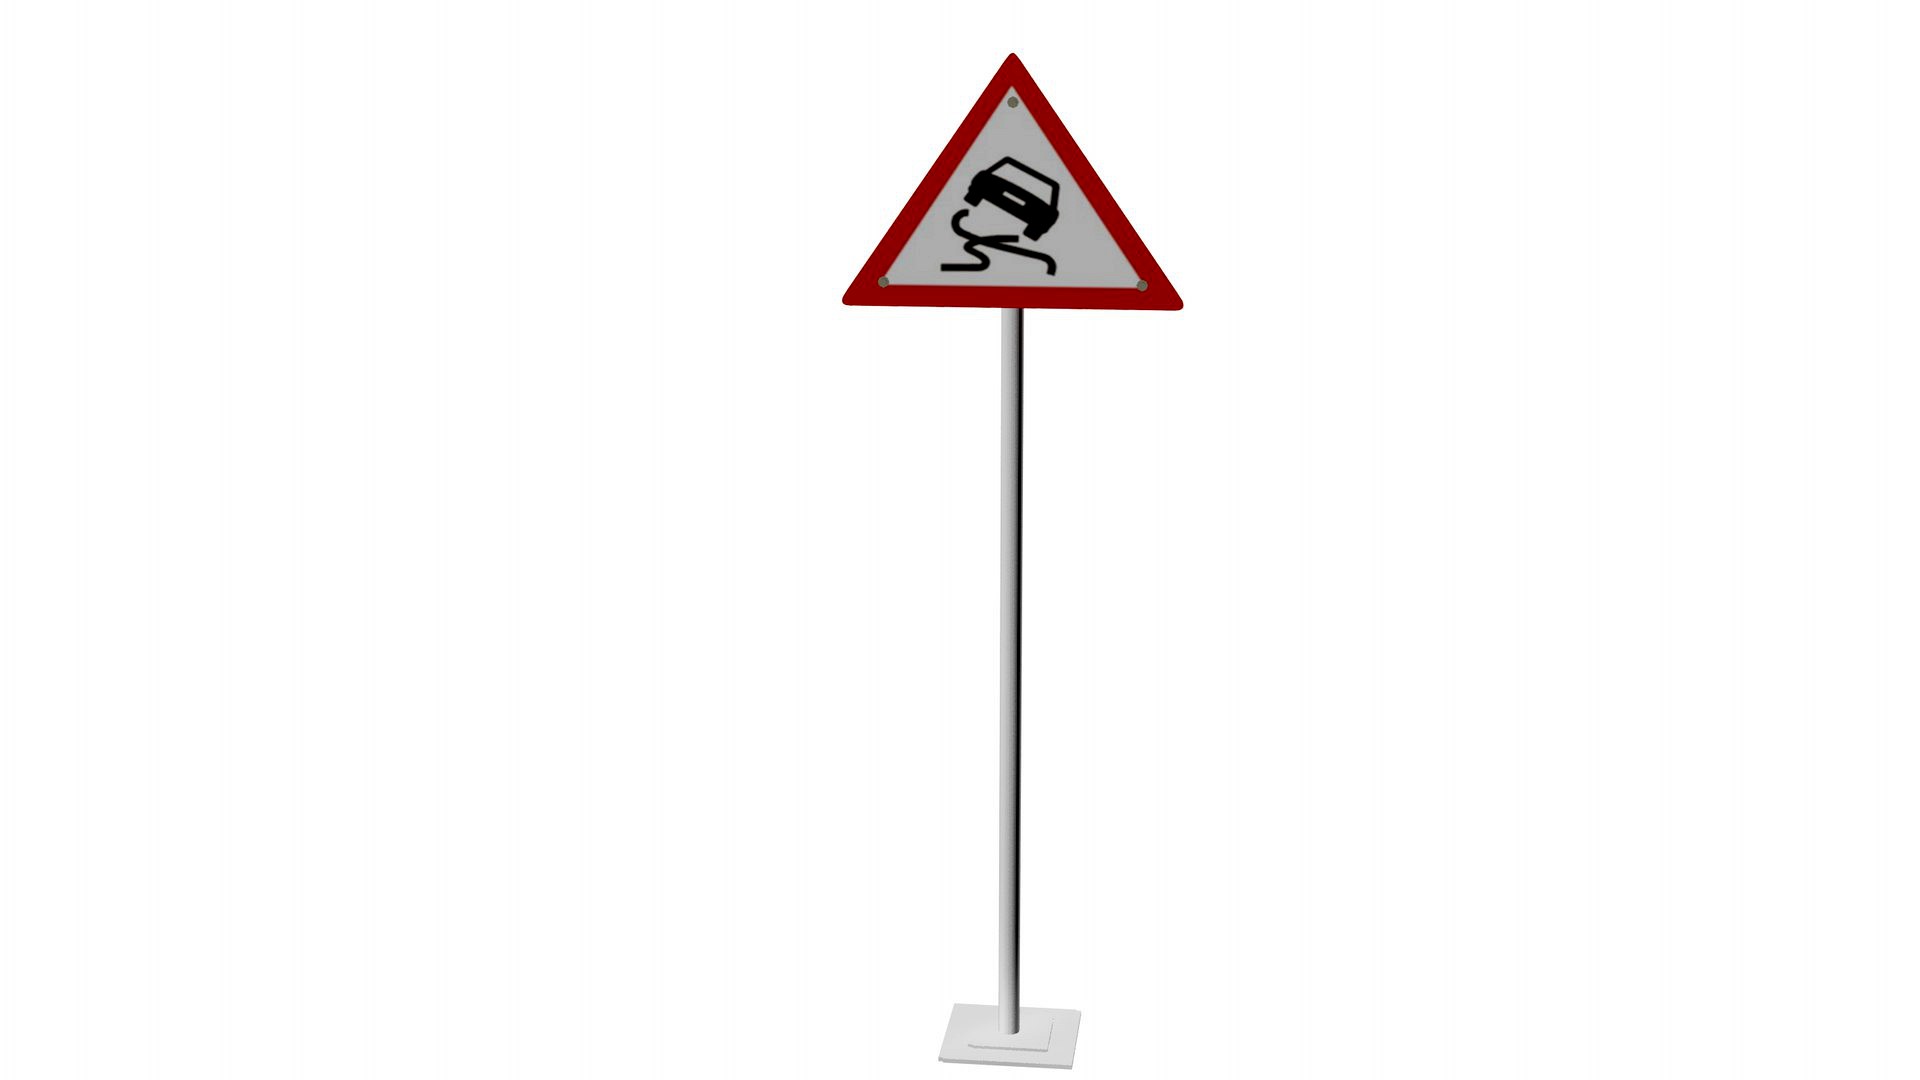 Risk of slipping [road signal]